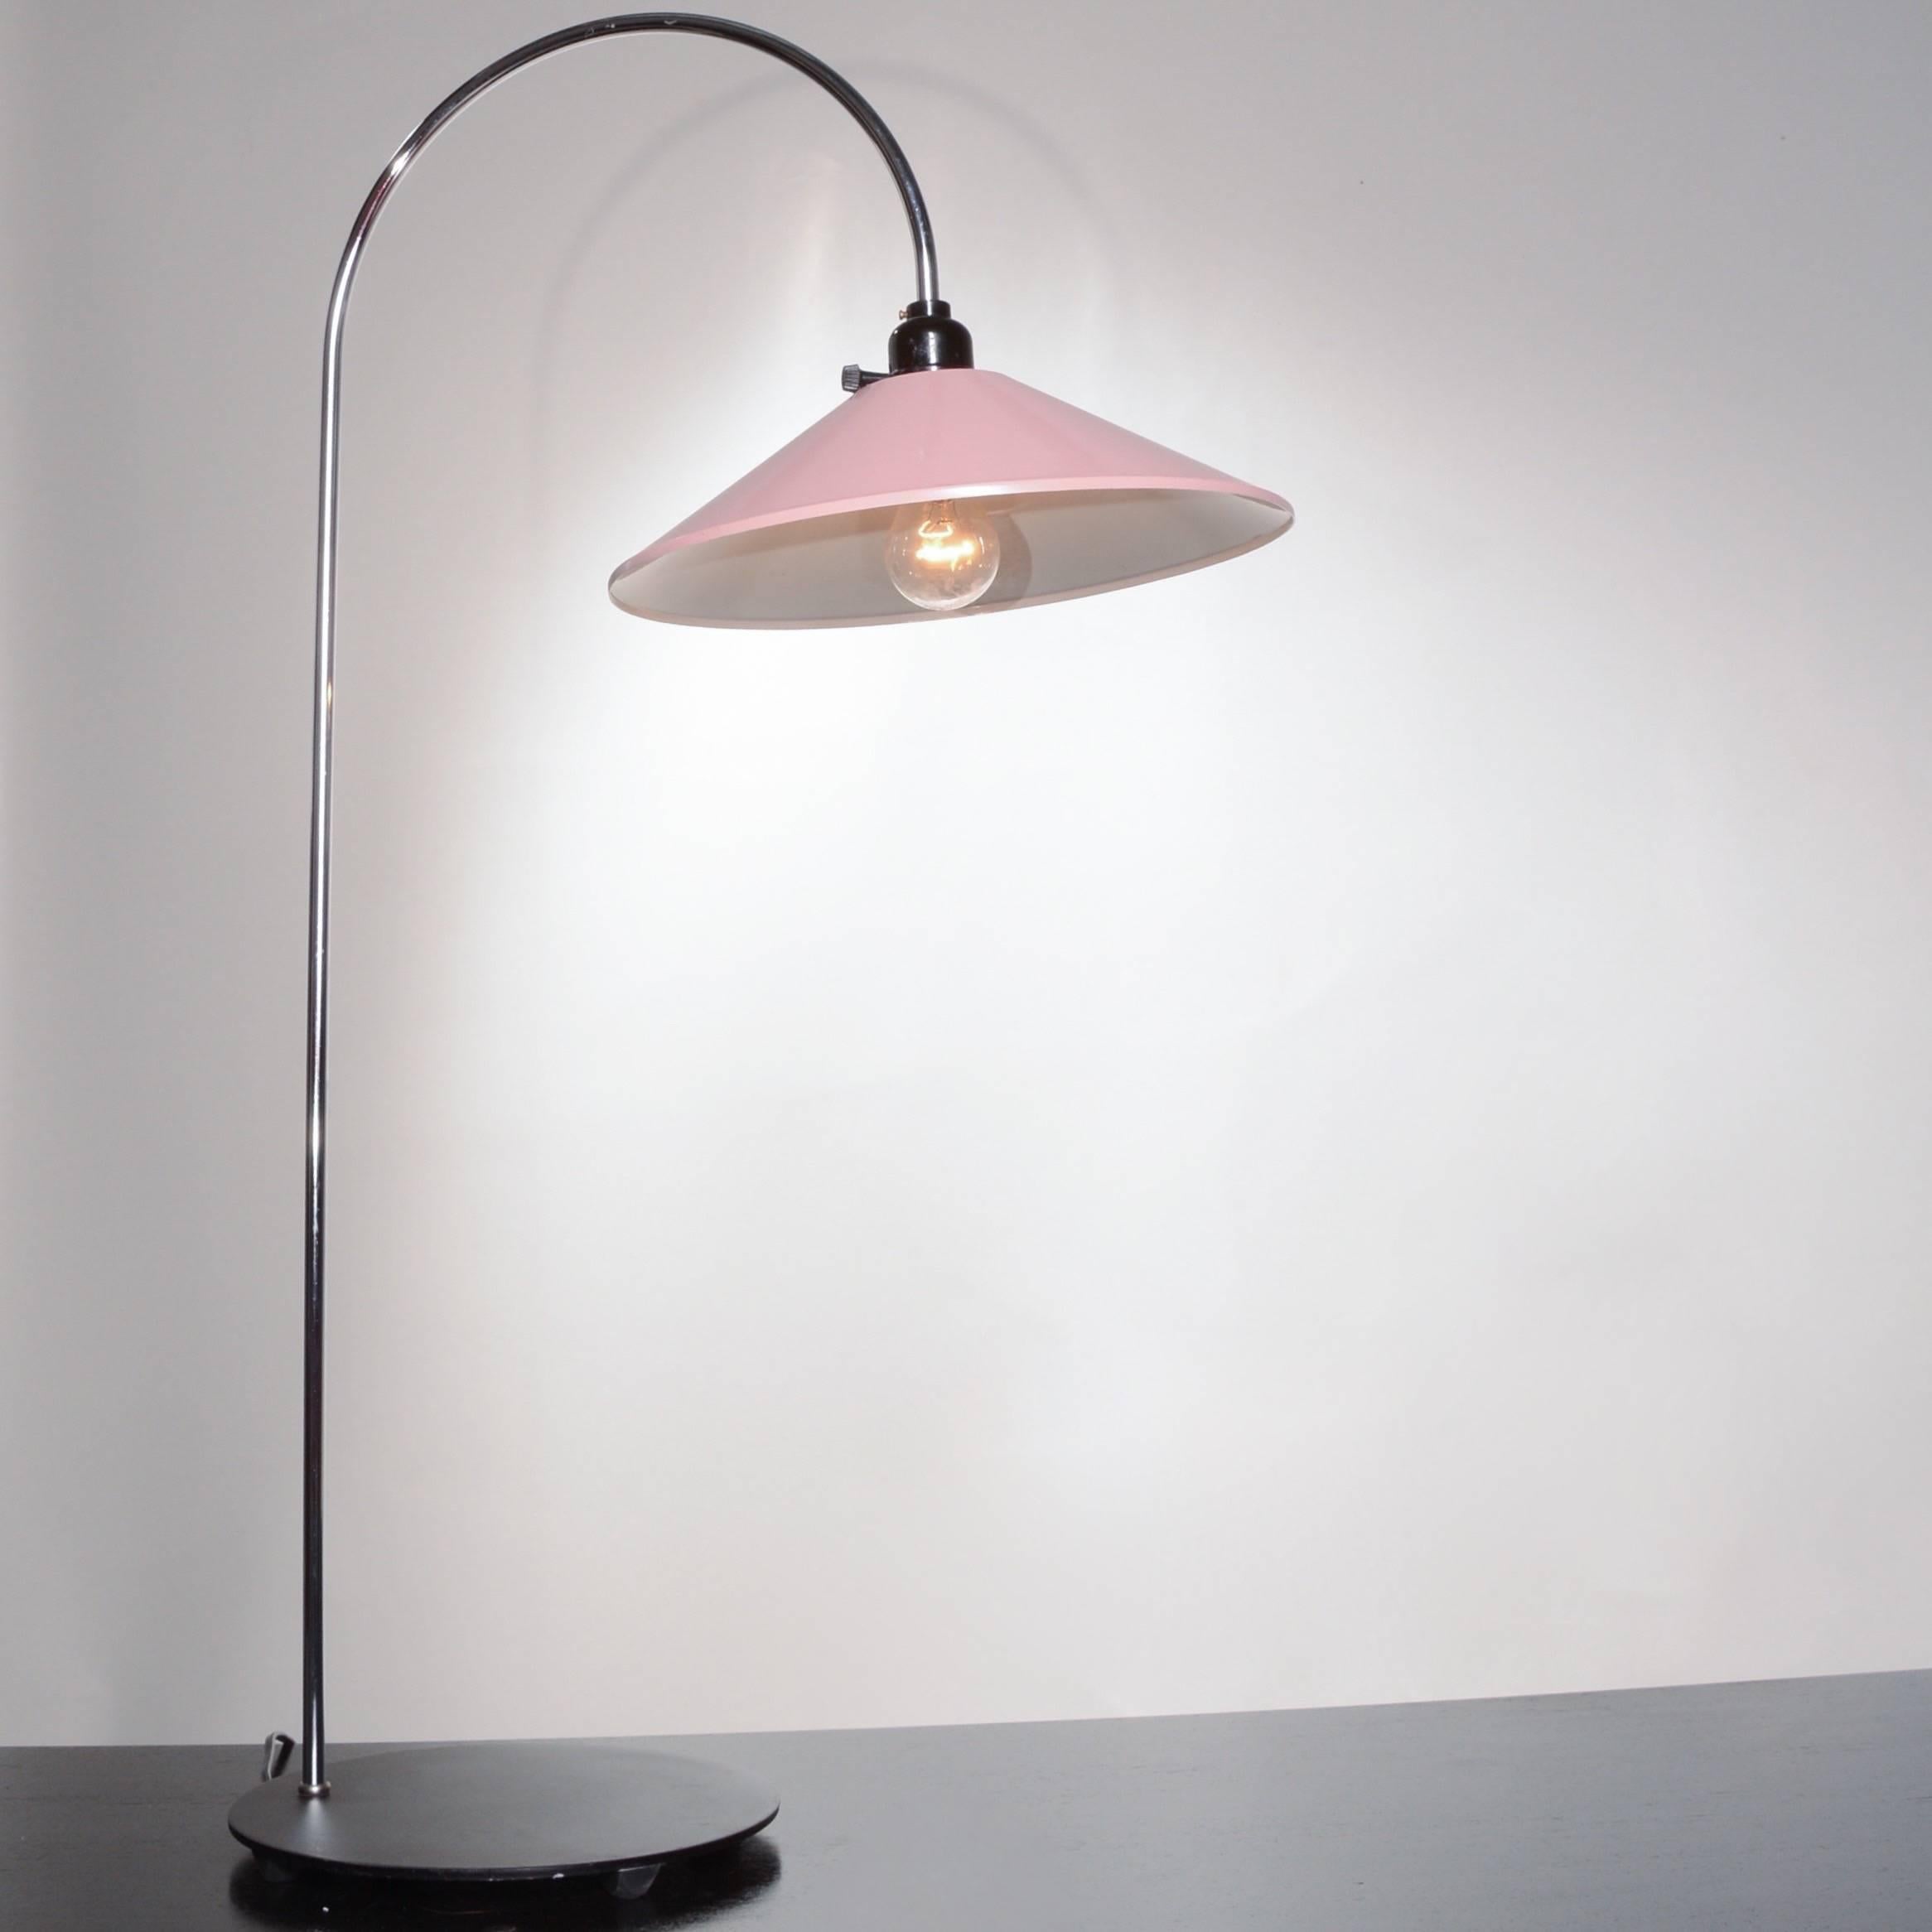 Beautiful dusty pink Danish modern table lamp. In excellent condition.